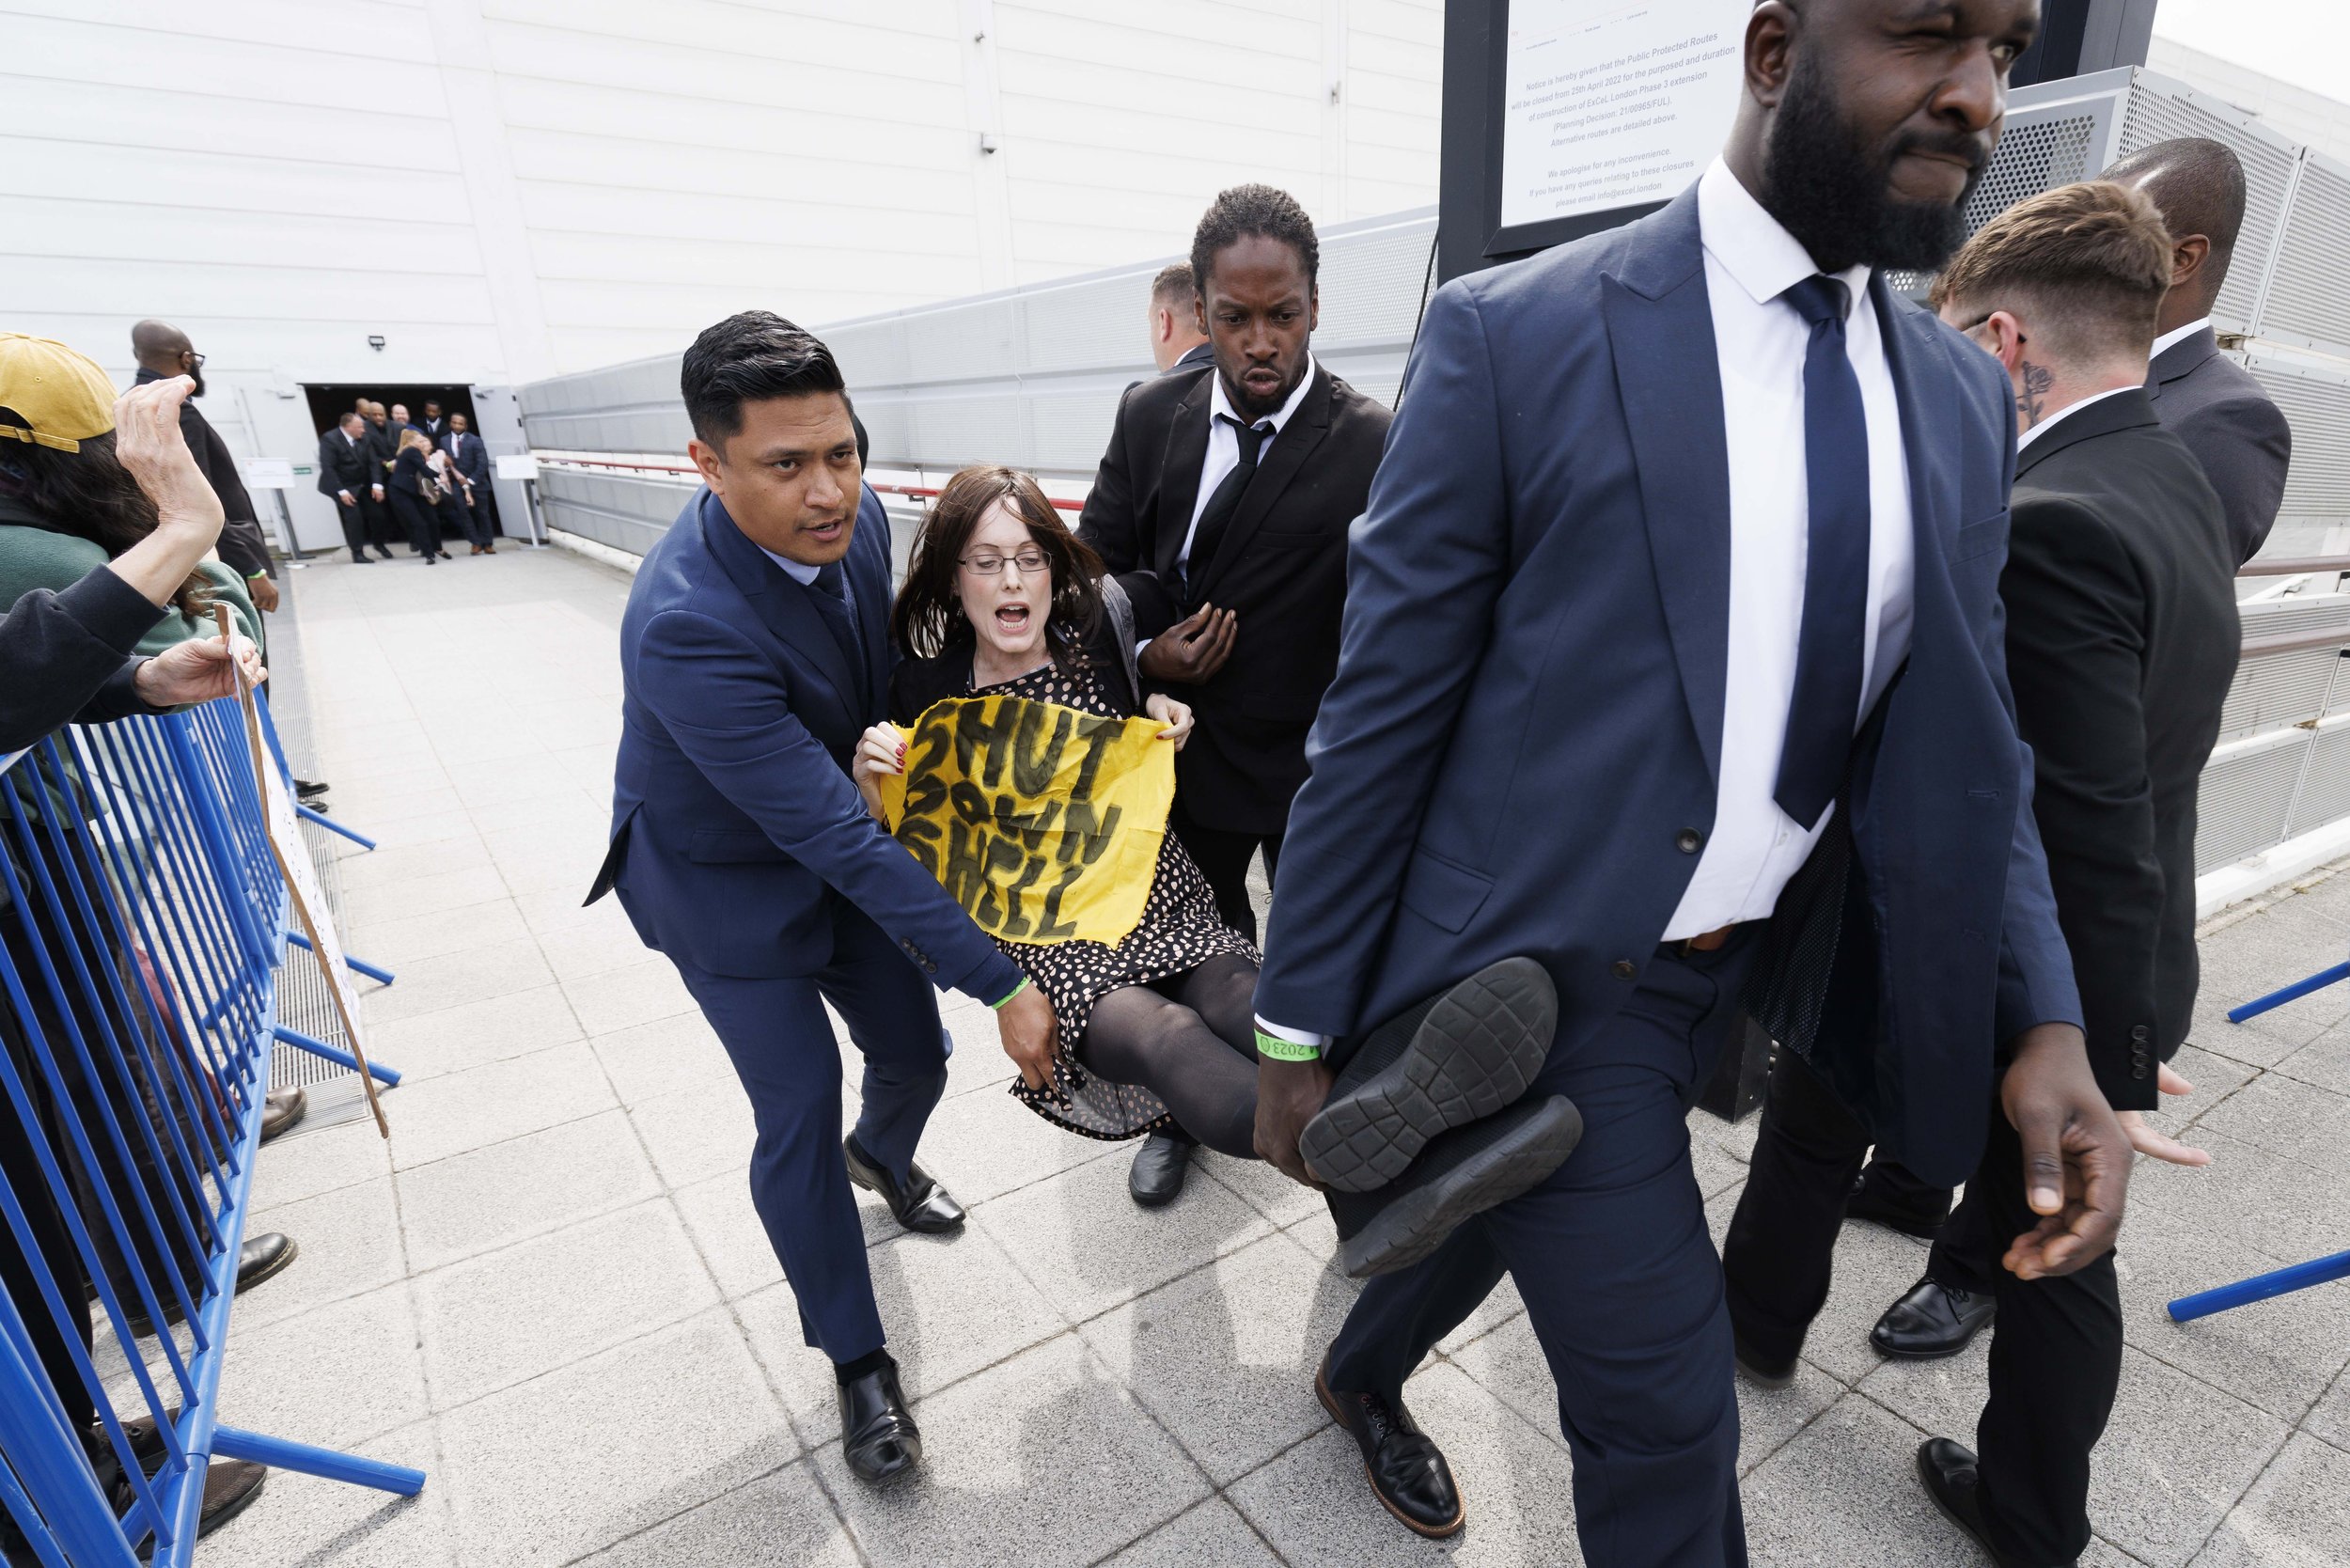  A climat change protestor is removed from Shell’s AGM by security at The Excel - May 2023.  